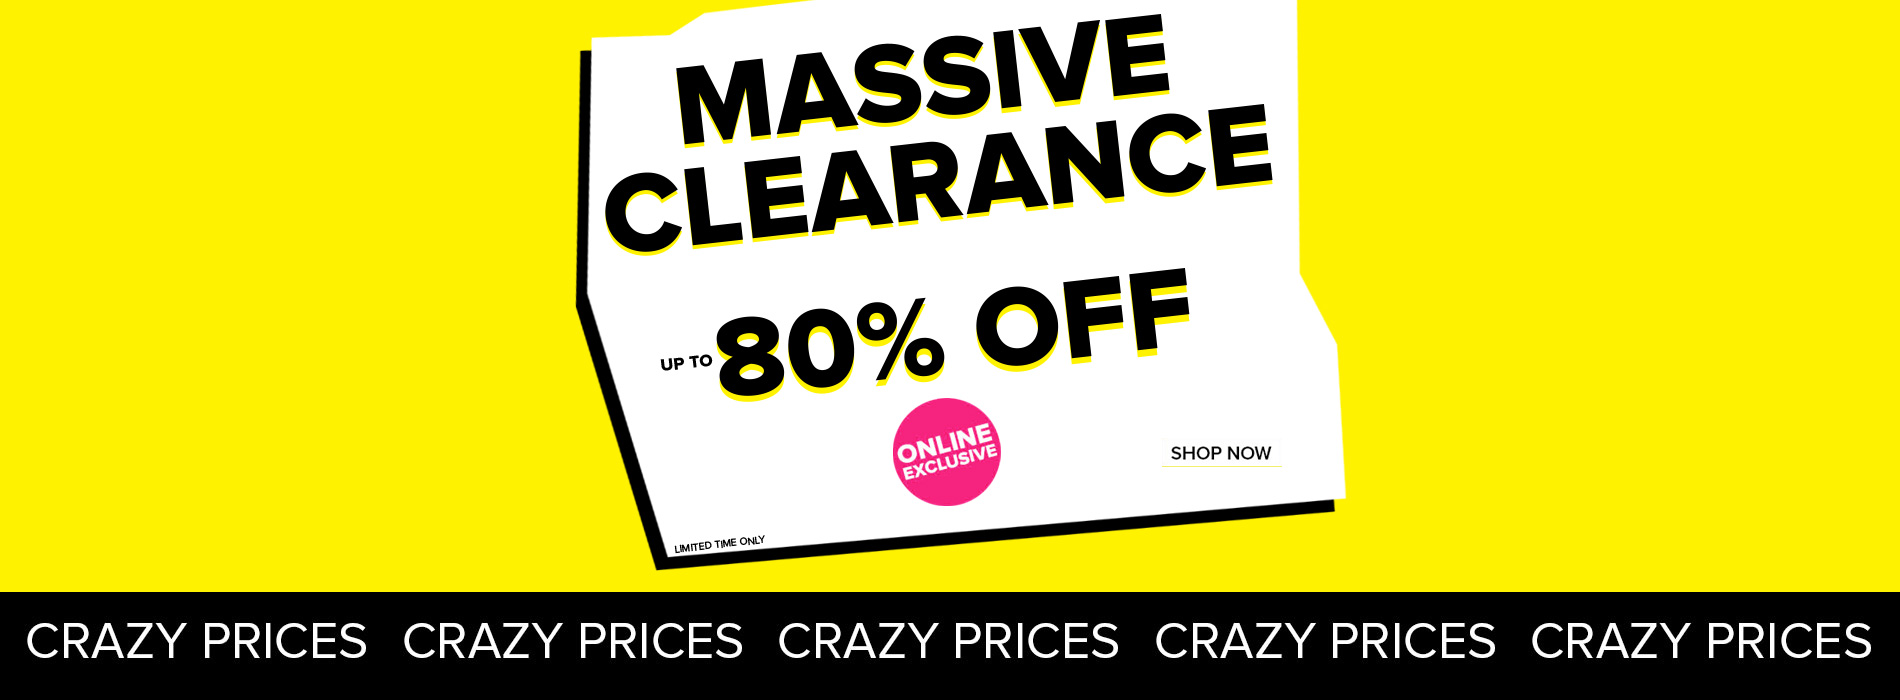 Select: massive clearance up to 80% off